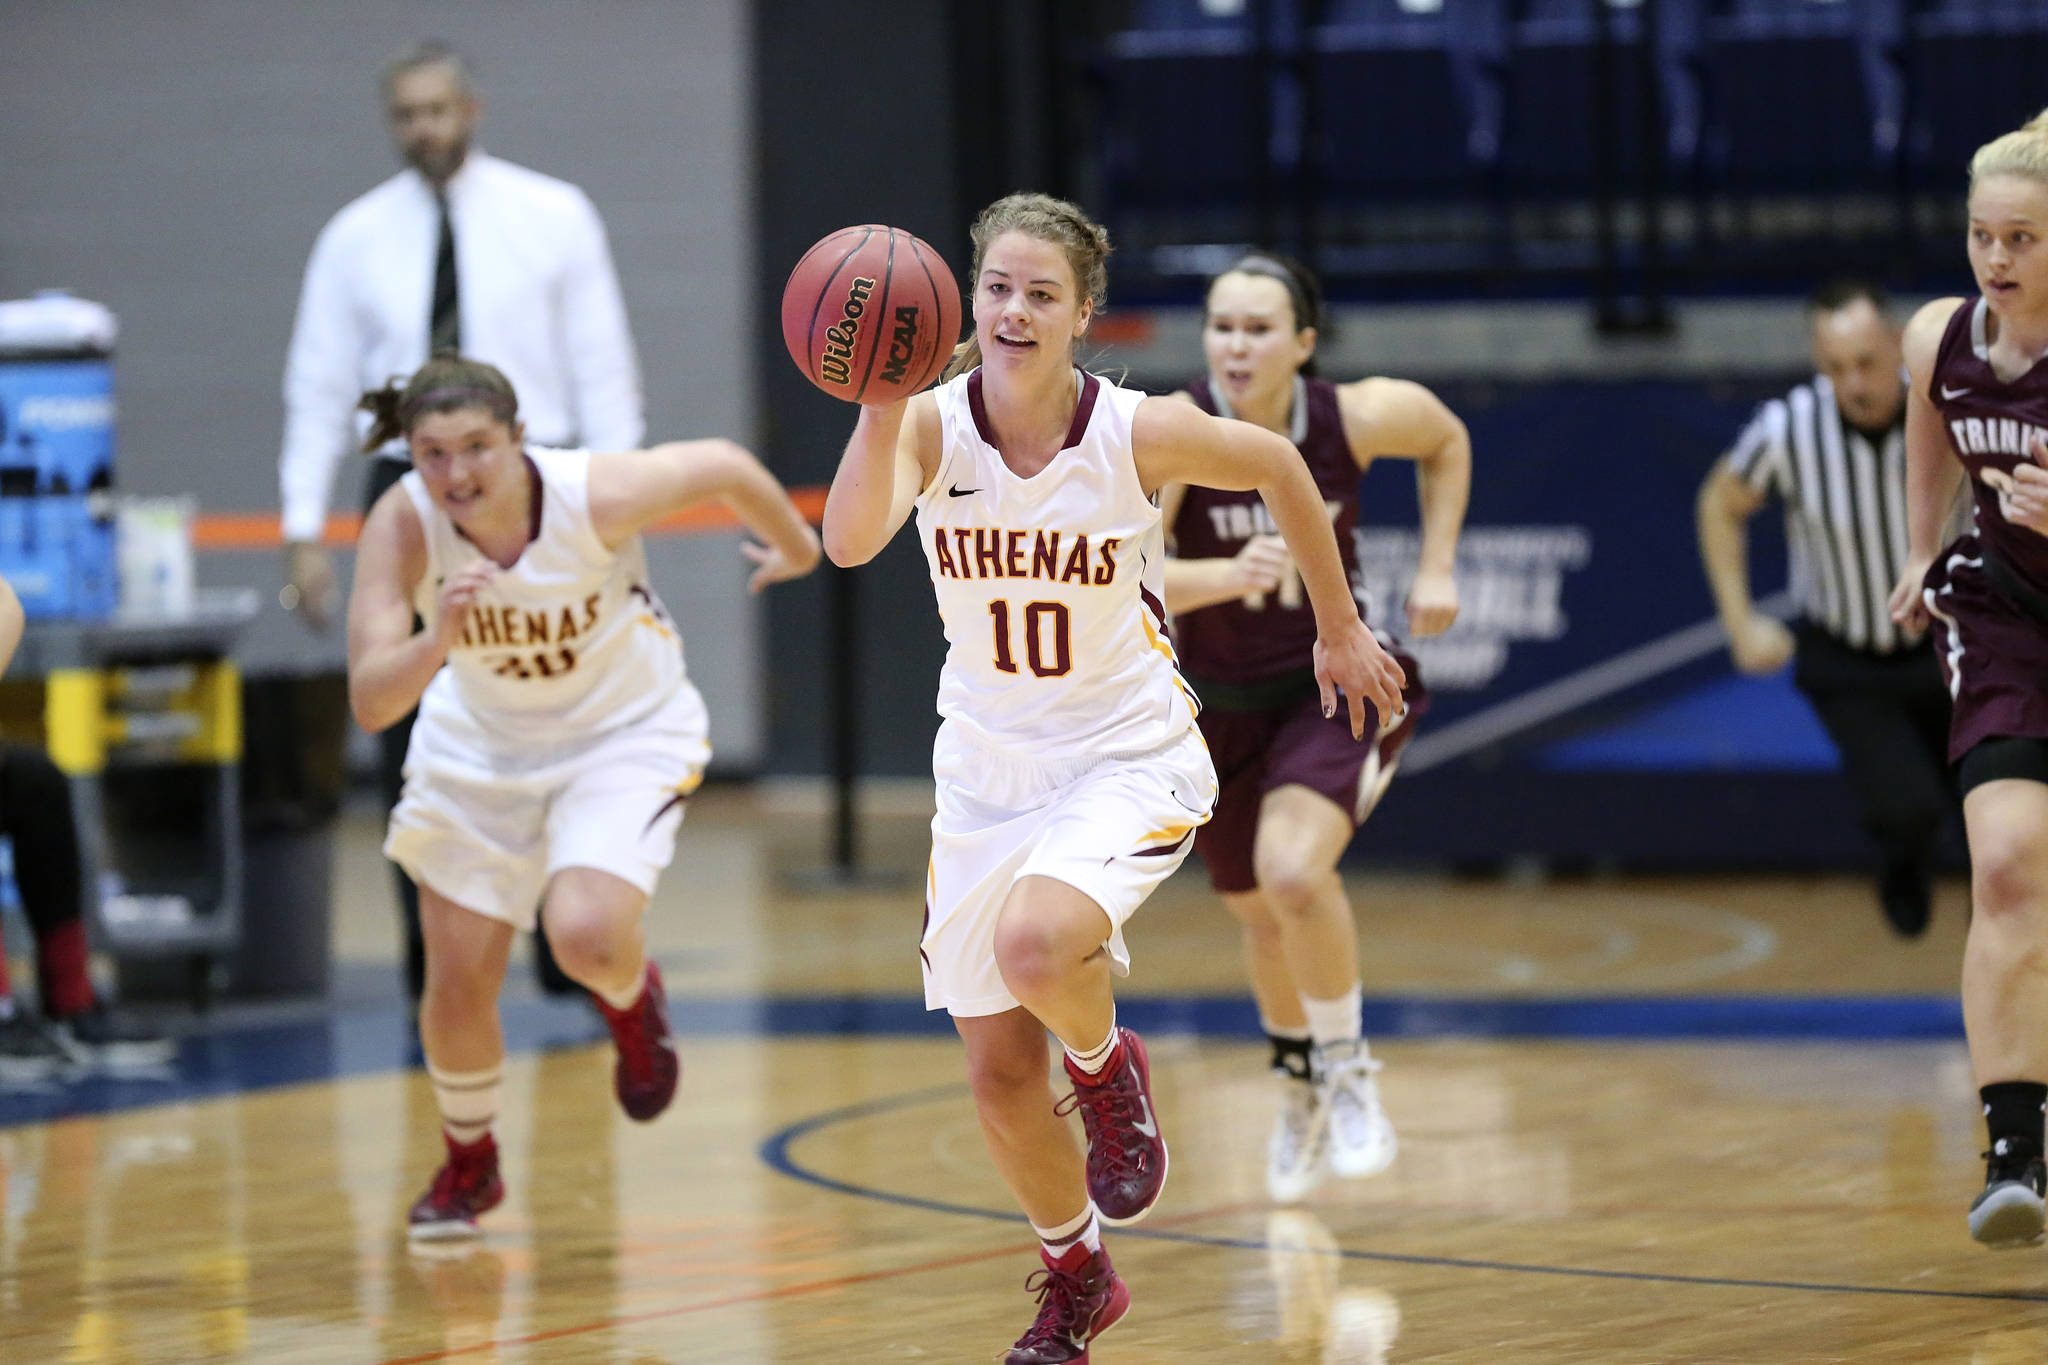 Photo courtesy of Emily Nordhoff                                Mercer Island High School 2013 graduate Kris Brackmann, who was one of the best women’s basketball players on the Division-III Claremont-Mudd-Scripps Athenas collegiate basketball program the past four seasons, was named the 2017 CMS Athlete of the Year on June 14. Brackmann averaged 11.6 points, 5.4 rebounds and 2 steals per game during the 2016-17 season. The Athenas won the SCIAC championship for the fourth consecutive season.